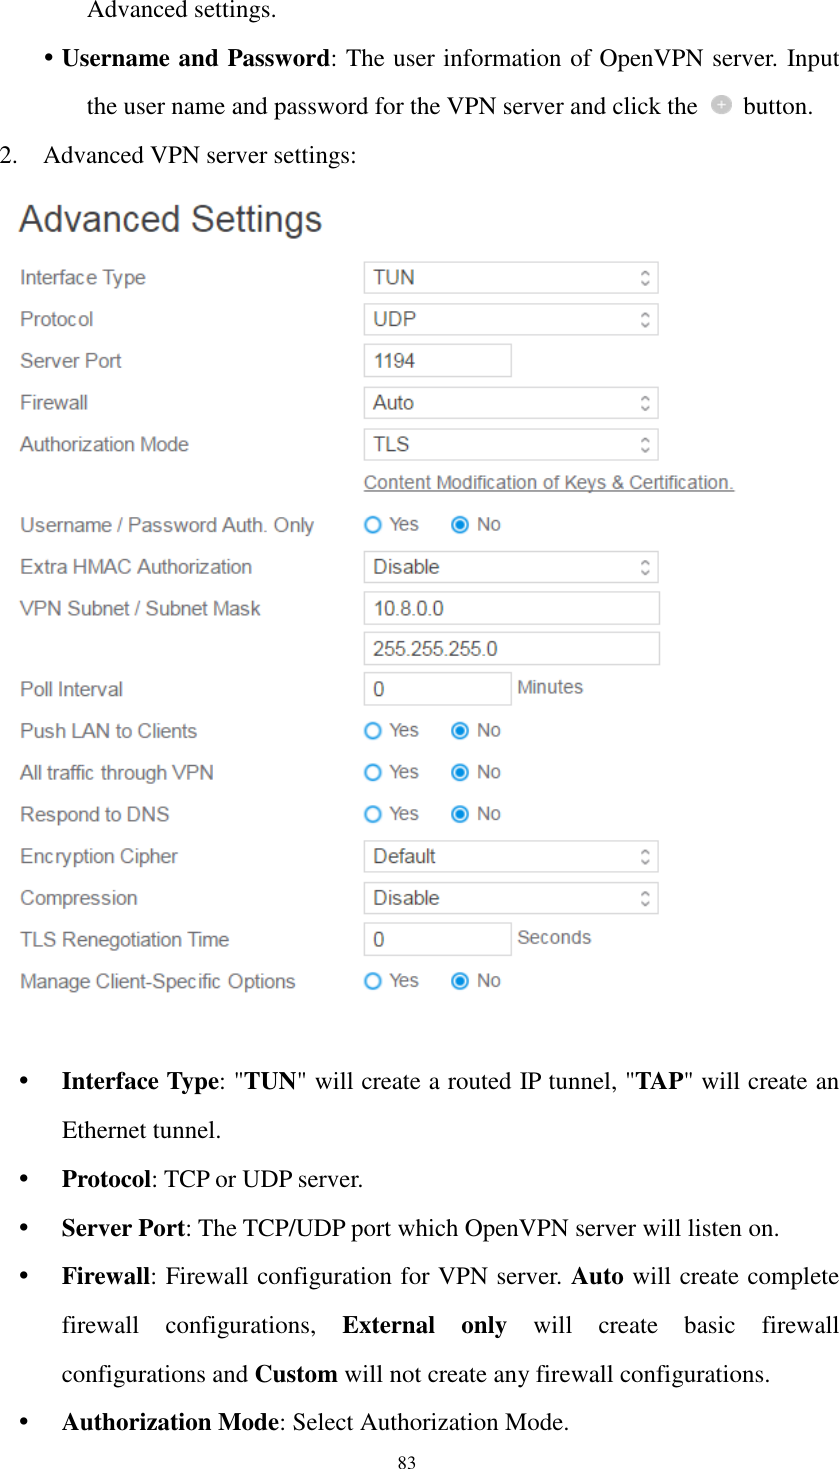  83 Advanced settings.  Username and Password: The user information of OpenVPN server. Input the user name and password for the VPN server and click the    button. 2. Advanced VPN server settings:    Interface Type: &quot;TUN&quot; will create a routed IP tunnel, &quot;TAP&quot; will create an Ethernet tunnel.  Protocol: TCP or UDP server.  Server Port: The TCP/UDP port which OpenVPN server will listen on.  Firewall: Firewall configuration for VPN server. Auto will create complete firewall  configurations,  External  only  will  create  basic  firewall configurations and Custom will not create any firewall configurations.  Authorization Mode: Select Authorization Mode. 